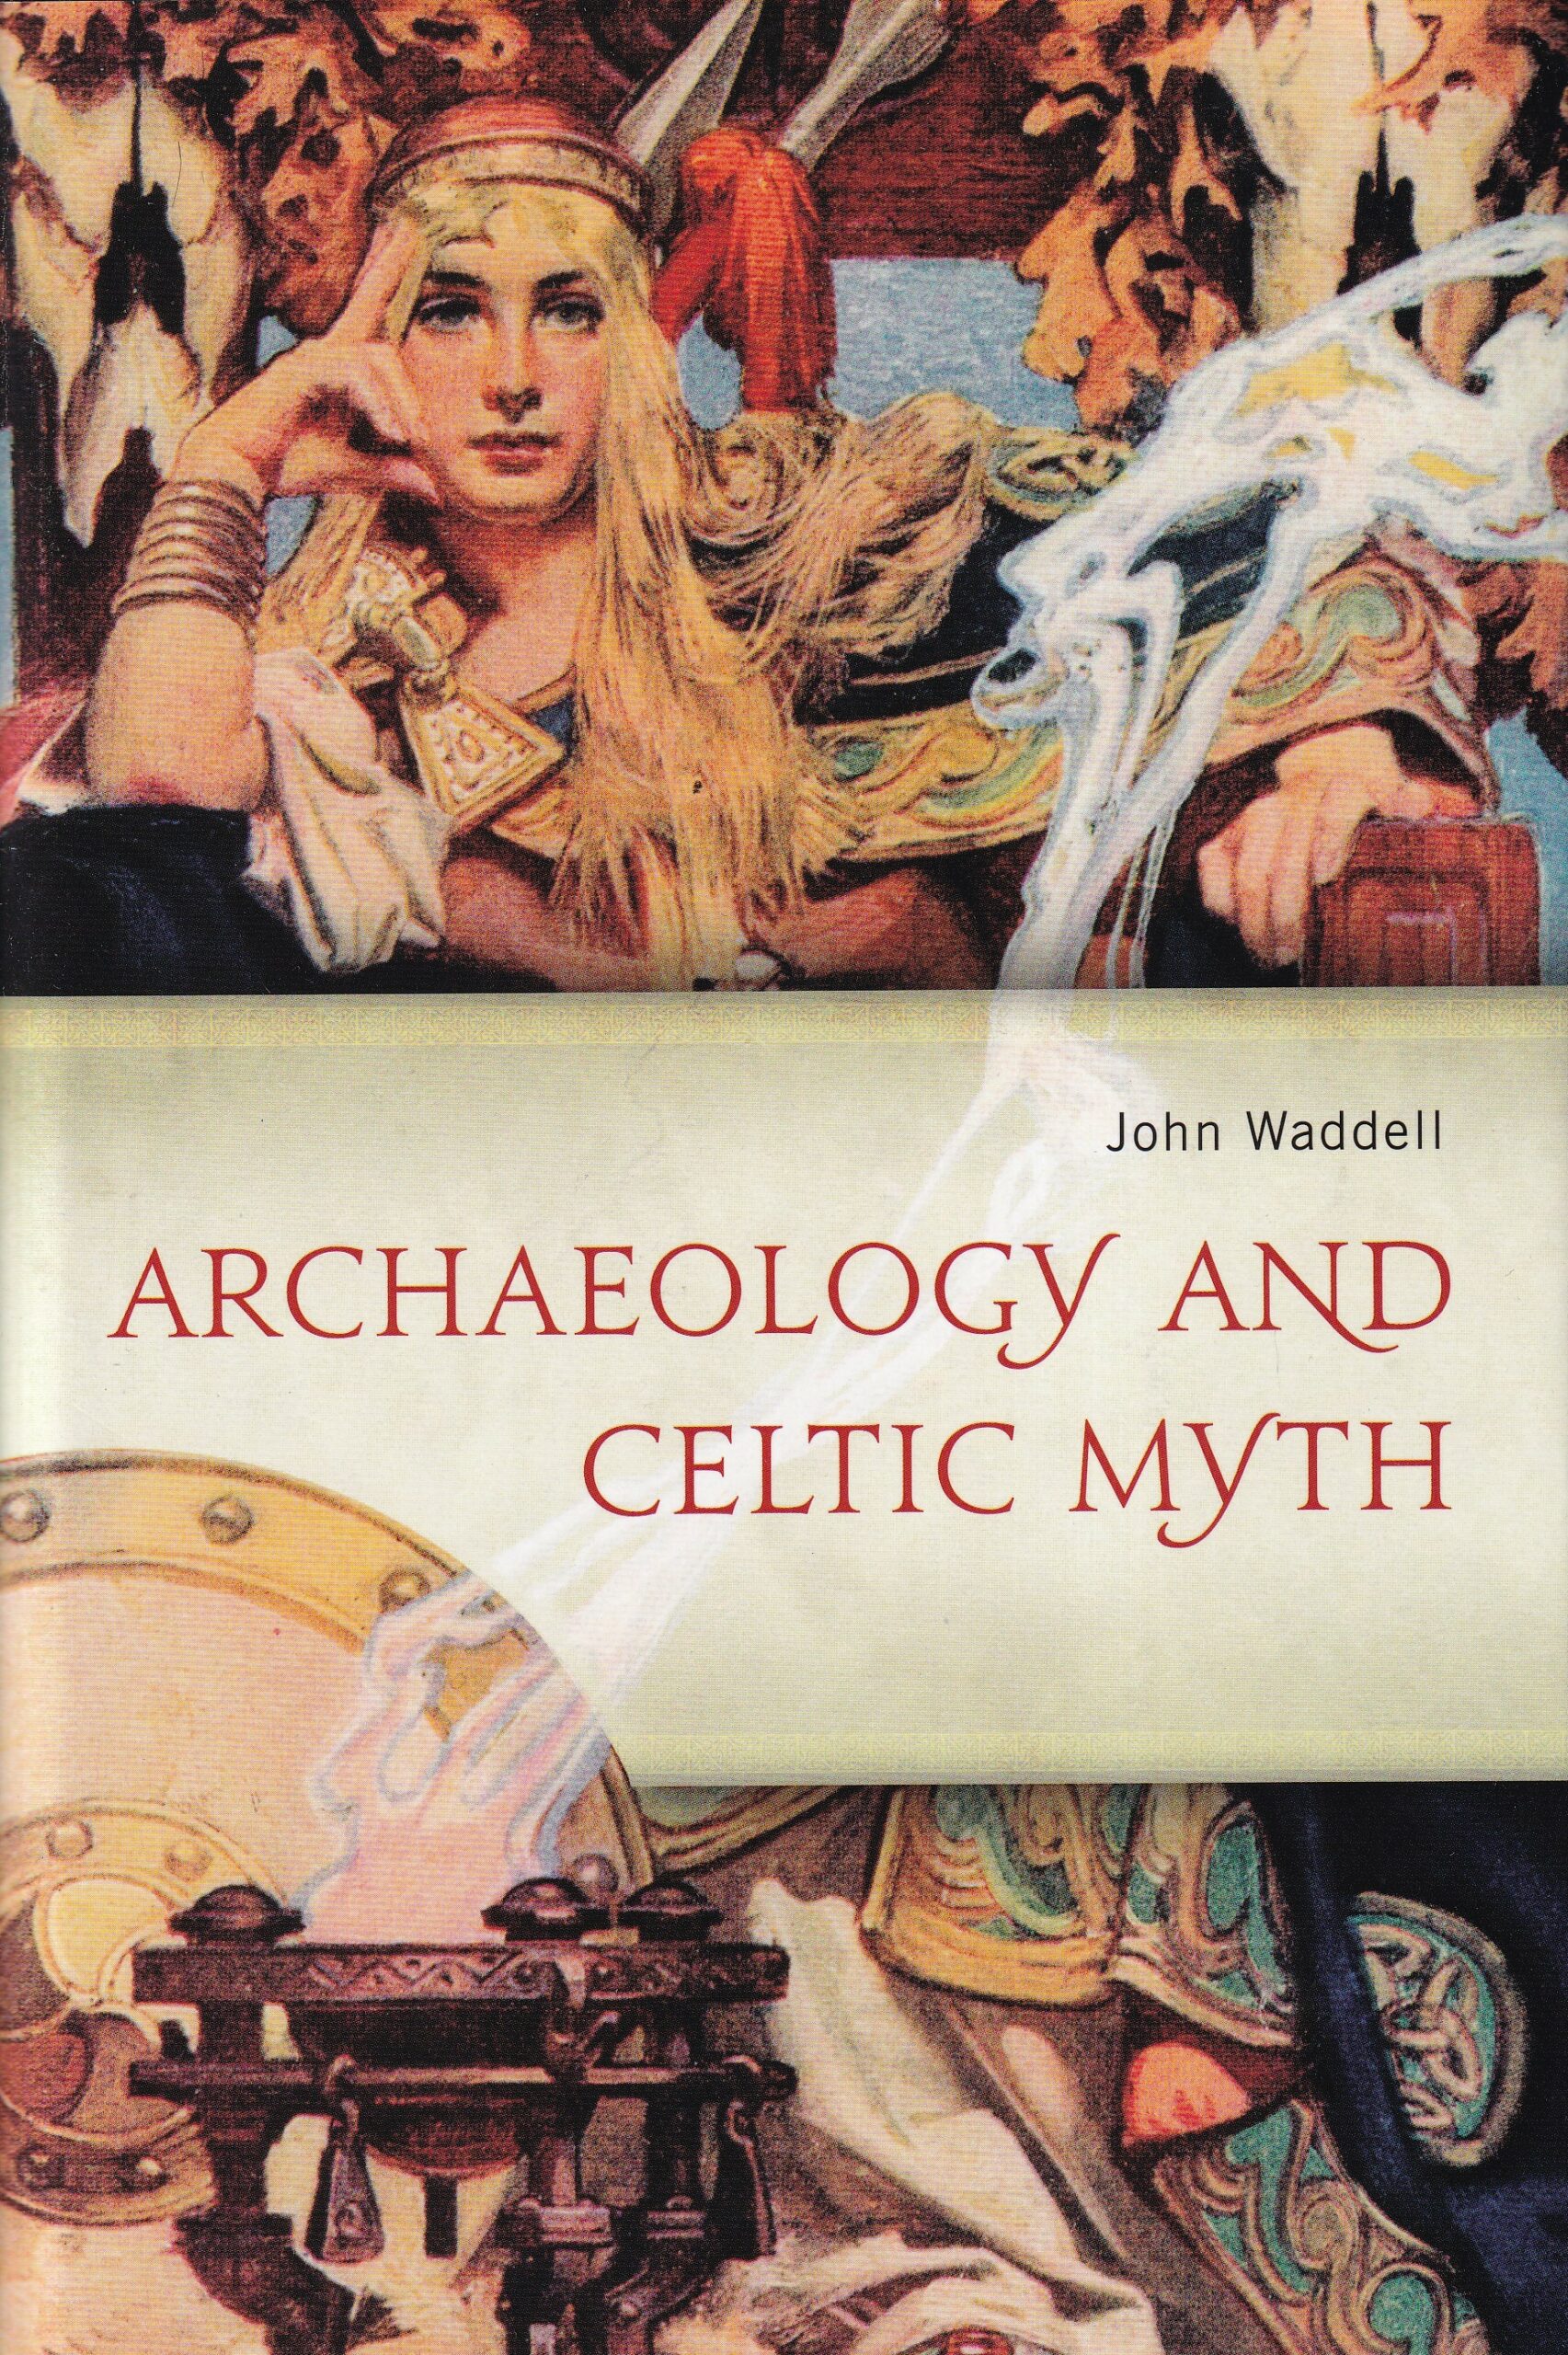 Archaeology and Celtic Myth- Signed by John Waddell